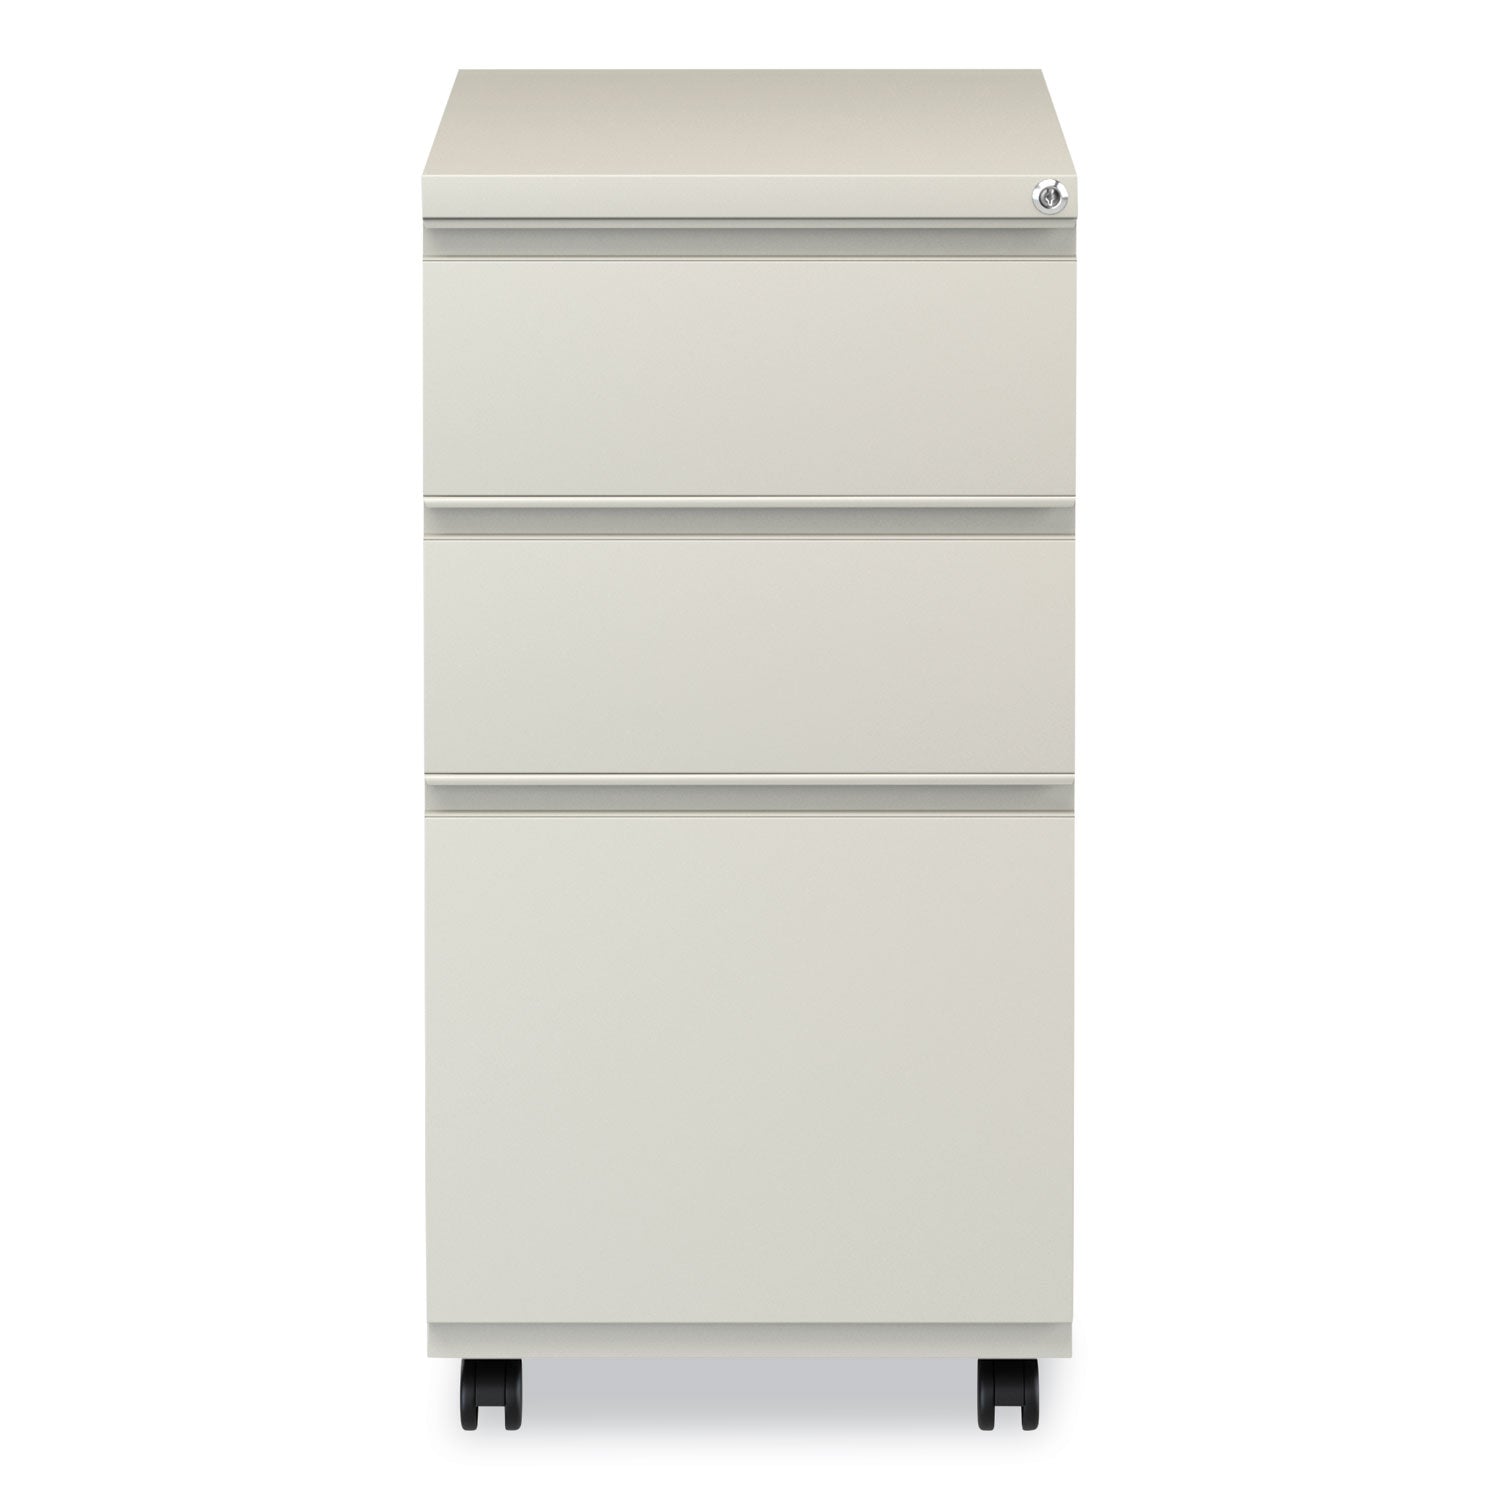 file-pedestal-with-full-length-pull-left-or-right-3-drawers-box-box-file-legal-letter-putty-1496-x-1929-x-2775_alepbbbfpy - 5